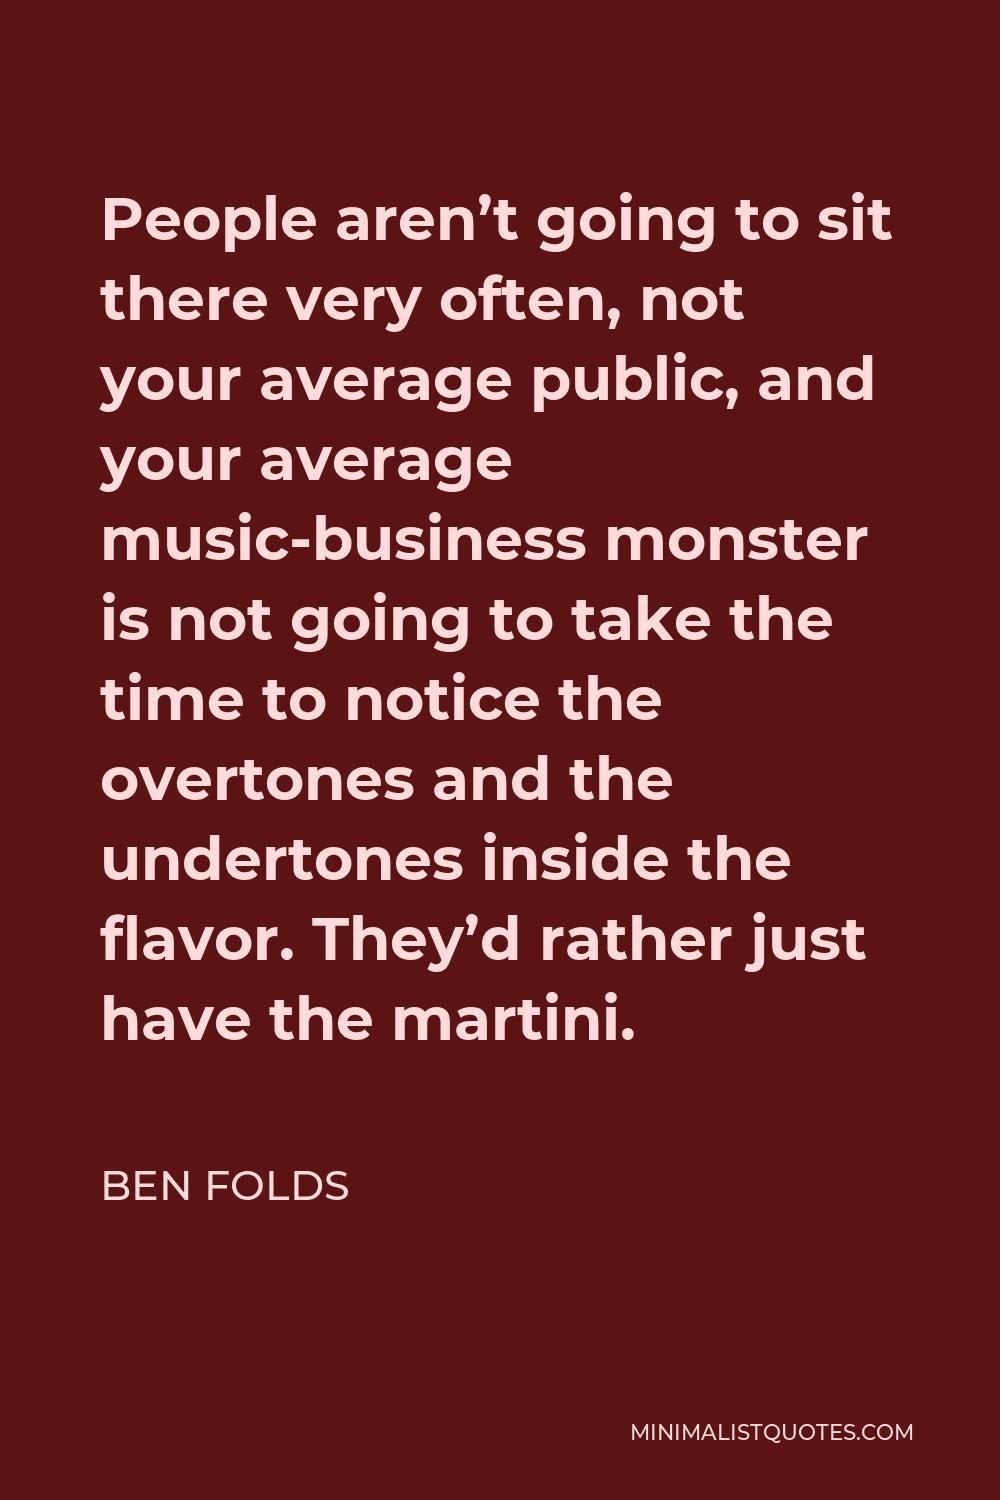 Ben Folds Quote - People aren’t going to sit there very often, not your average public, and your average music-business monster is not going to take the time to notice the overtones and the undertones inside the flavor. They’d rather just have the martini.